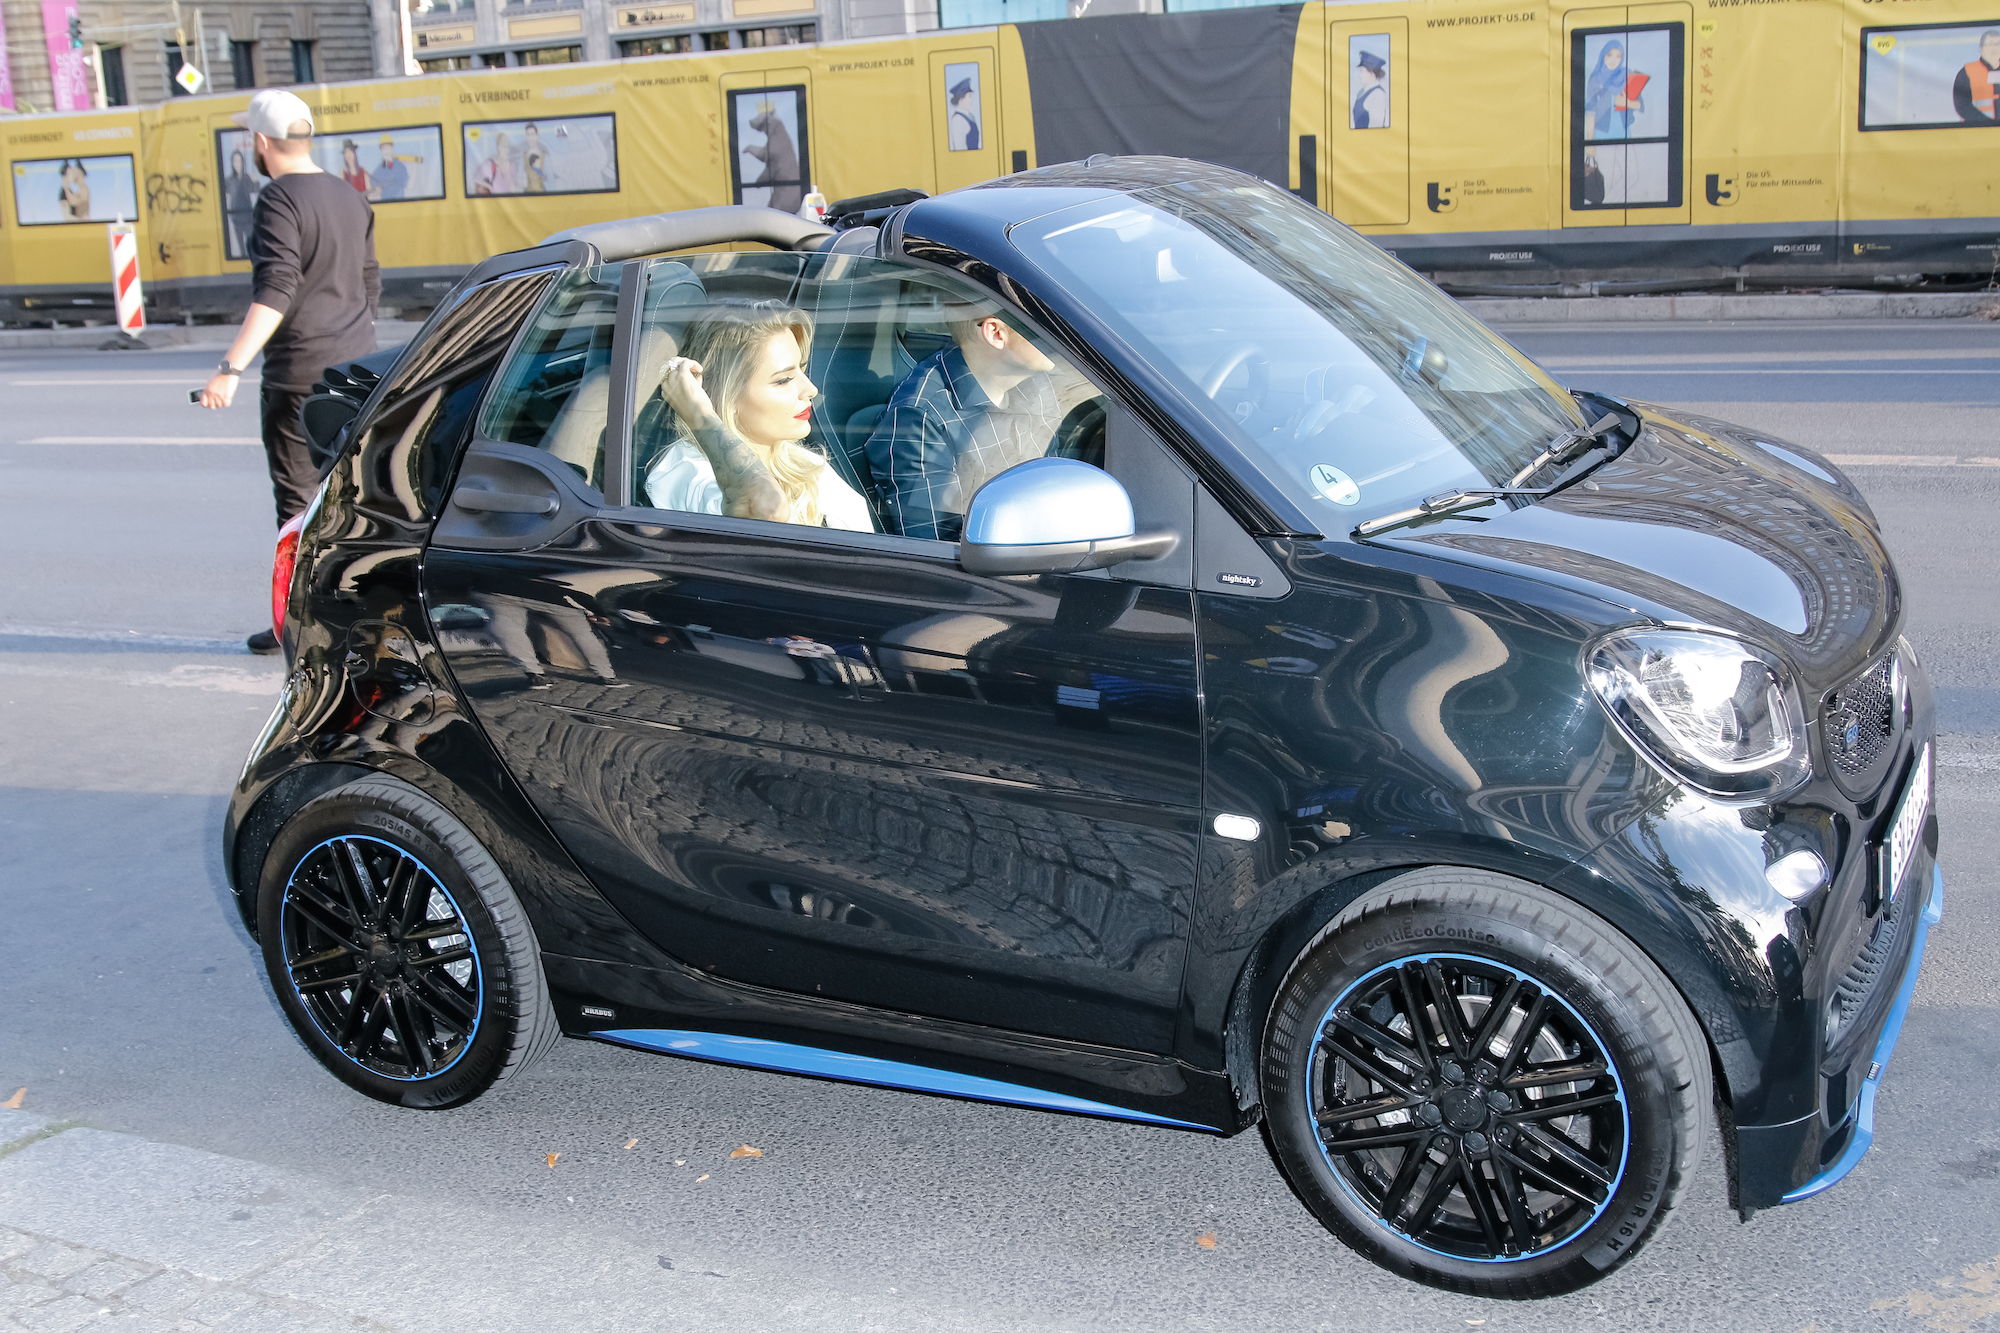 A Smart Fortwo at the 20 Years Smart car event on September 20, 2018, in Berlin, Germany.